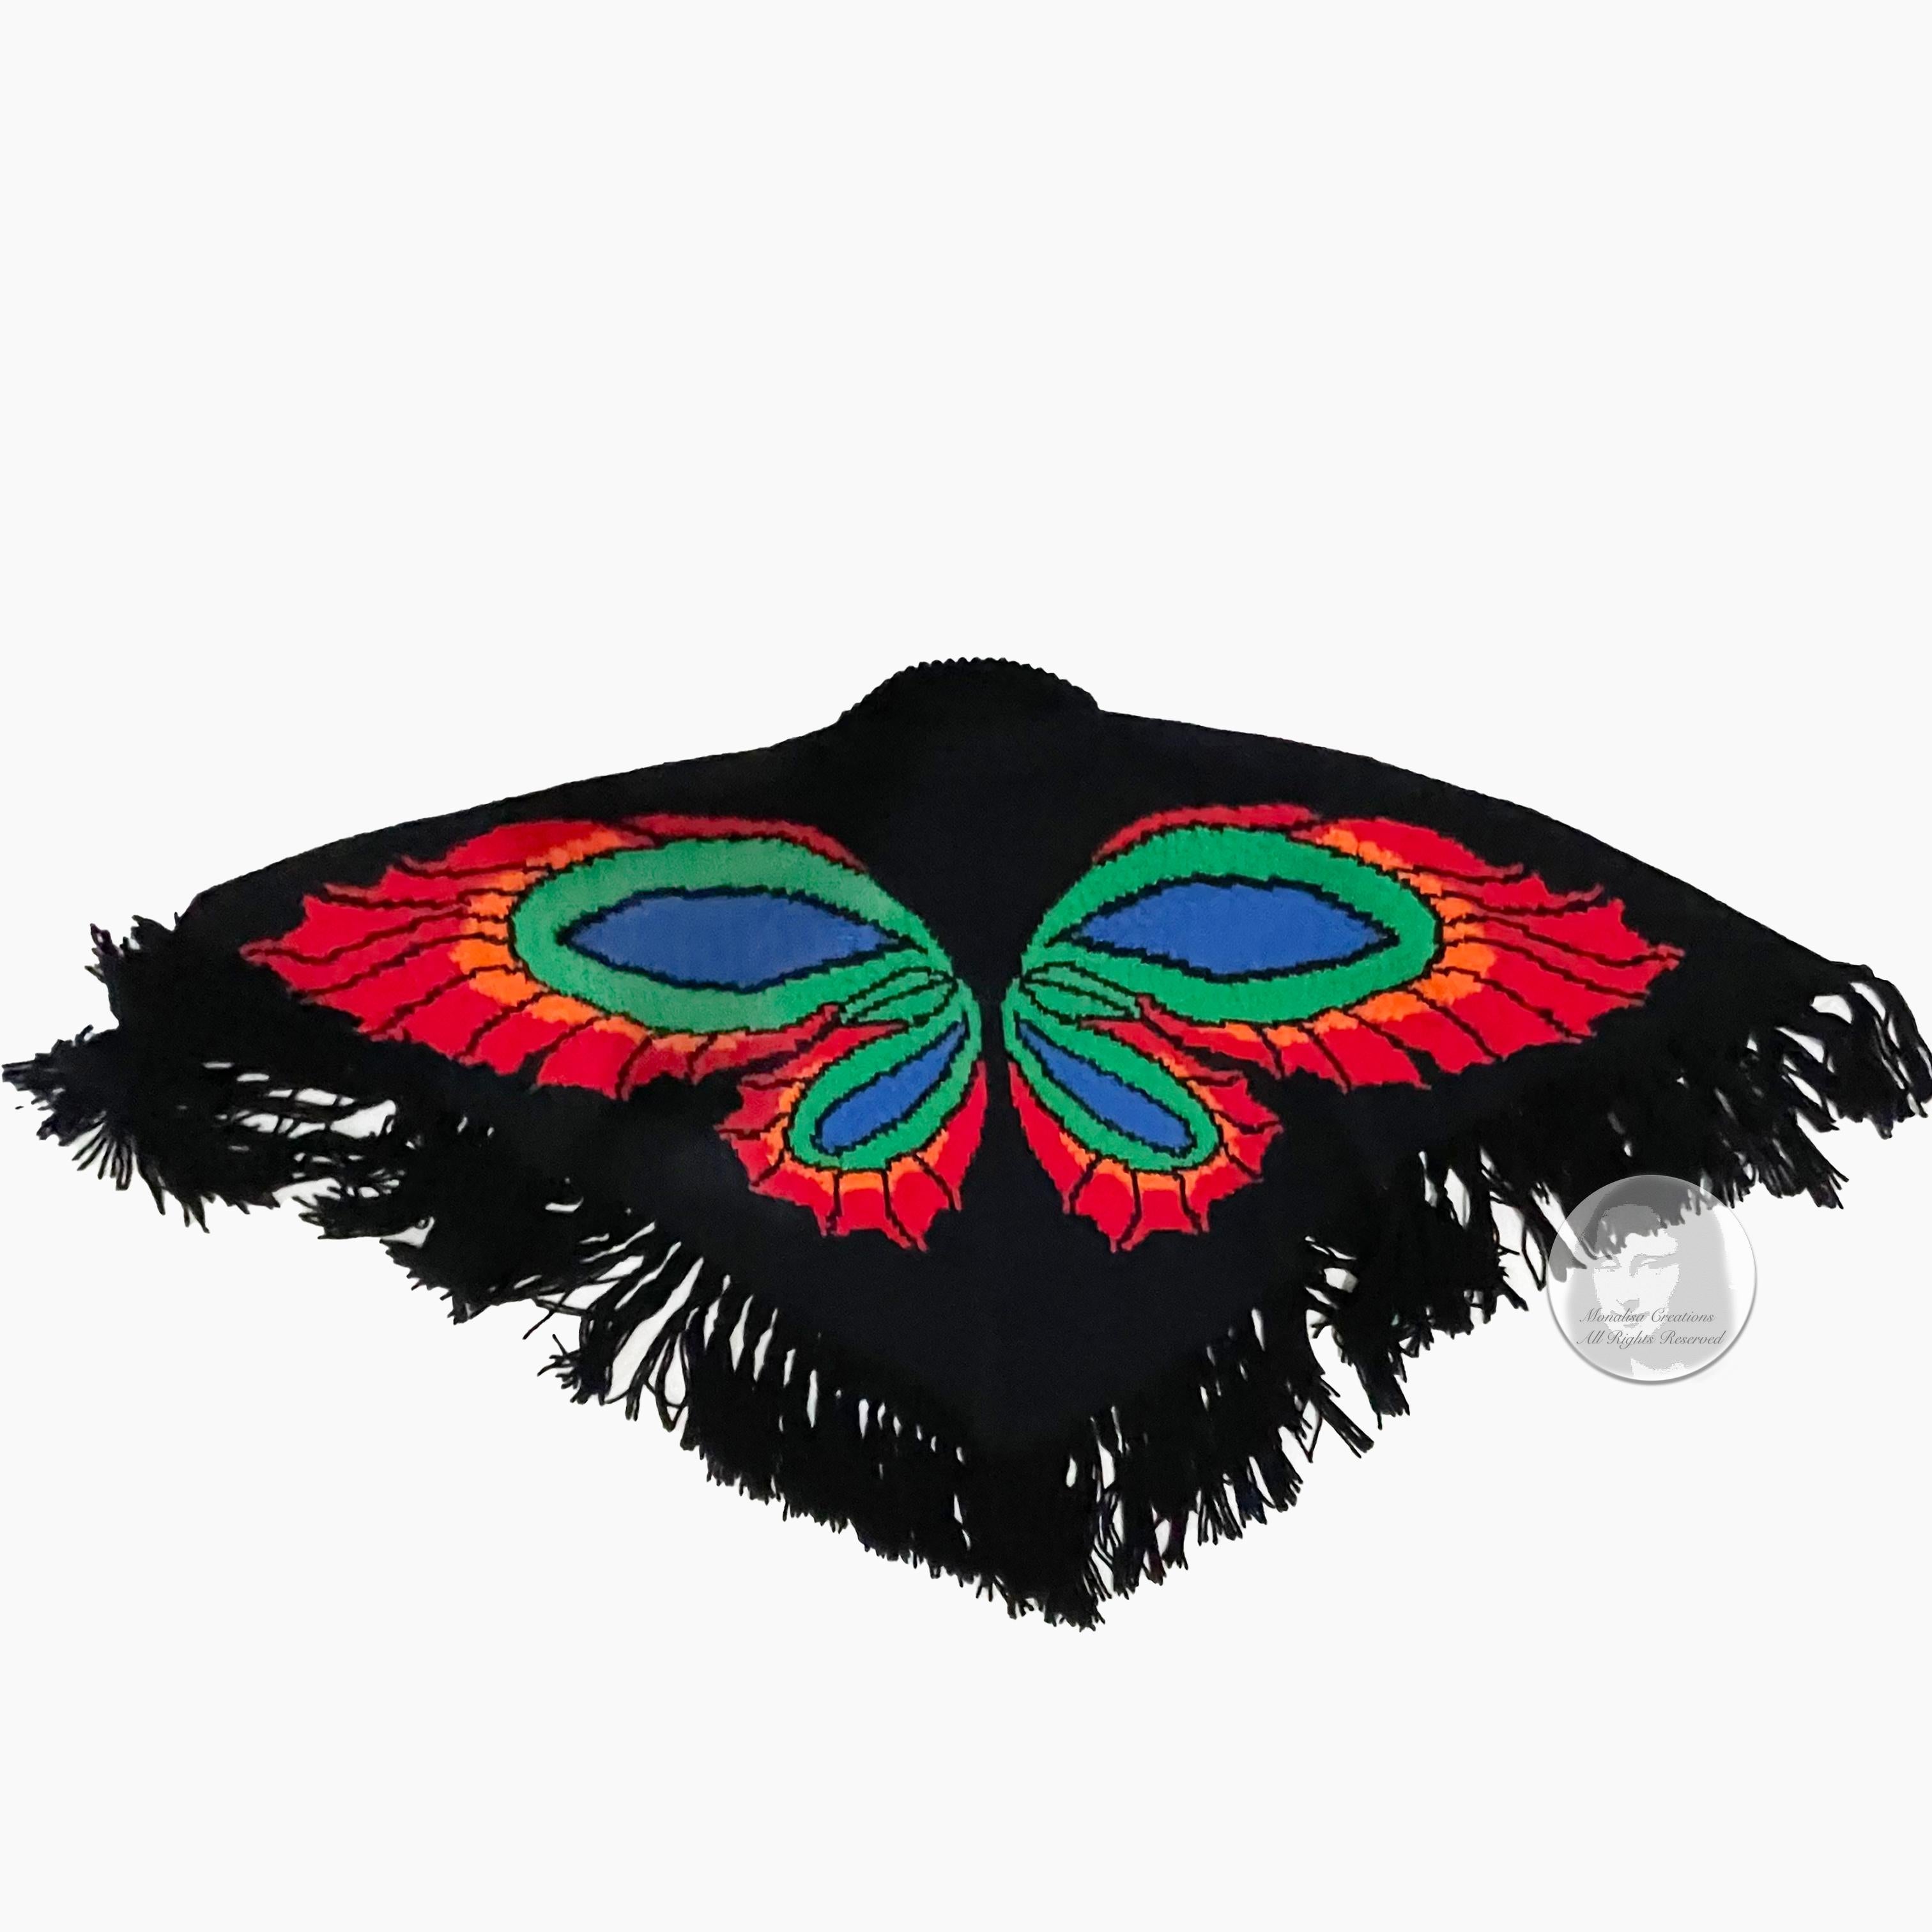 Butterfly Poncho Multicolor Knit with Fringe Trim Pullover Style Vintage OSFM  For Sale 4